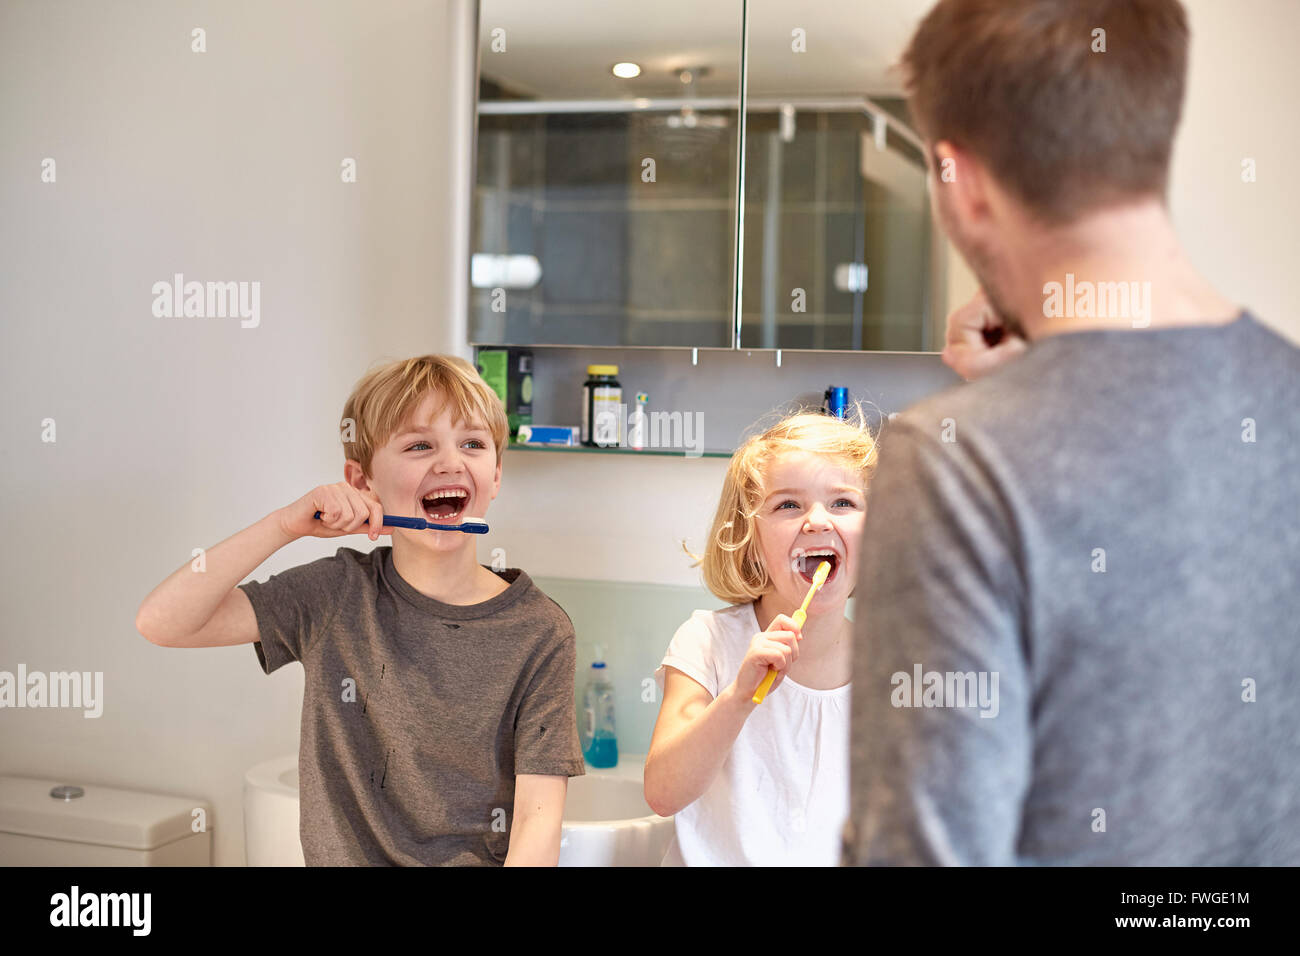 Two children and an adult man cleaning their teeth with toothbrushes in a bathroom. Stock Photo